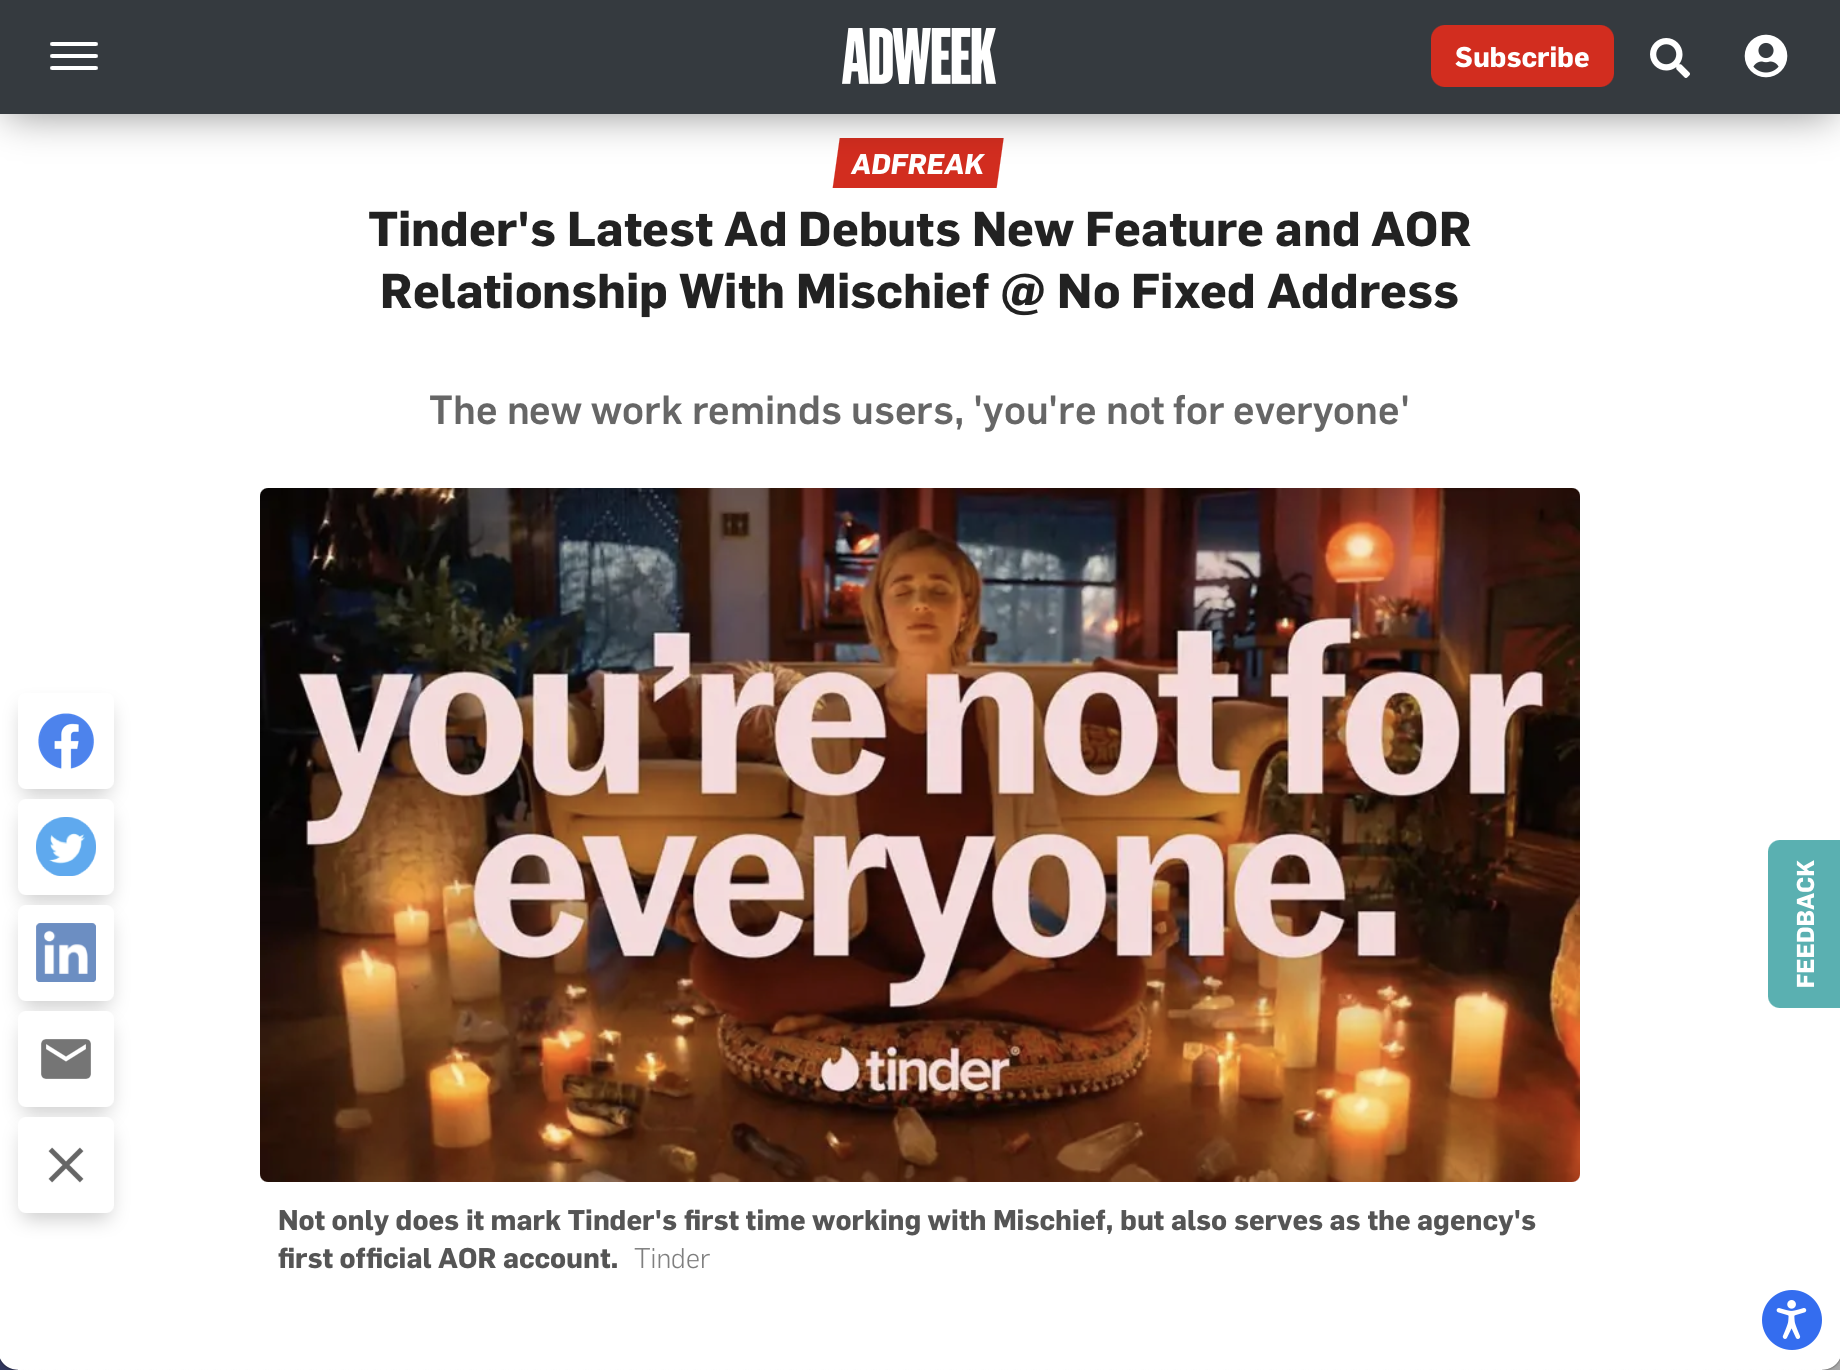 How to use Tinder's new Explore feature